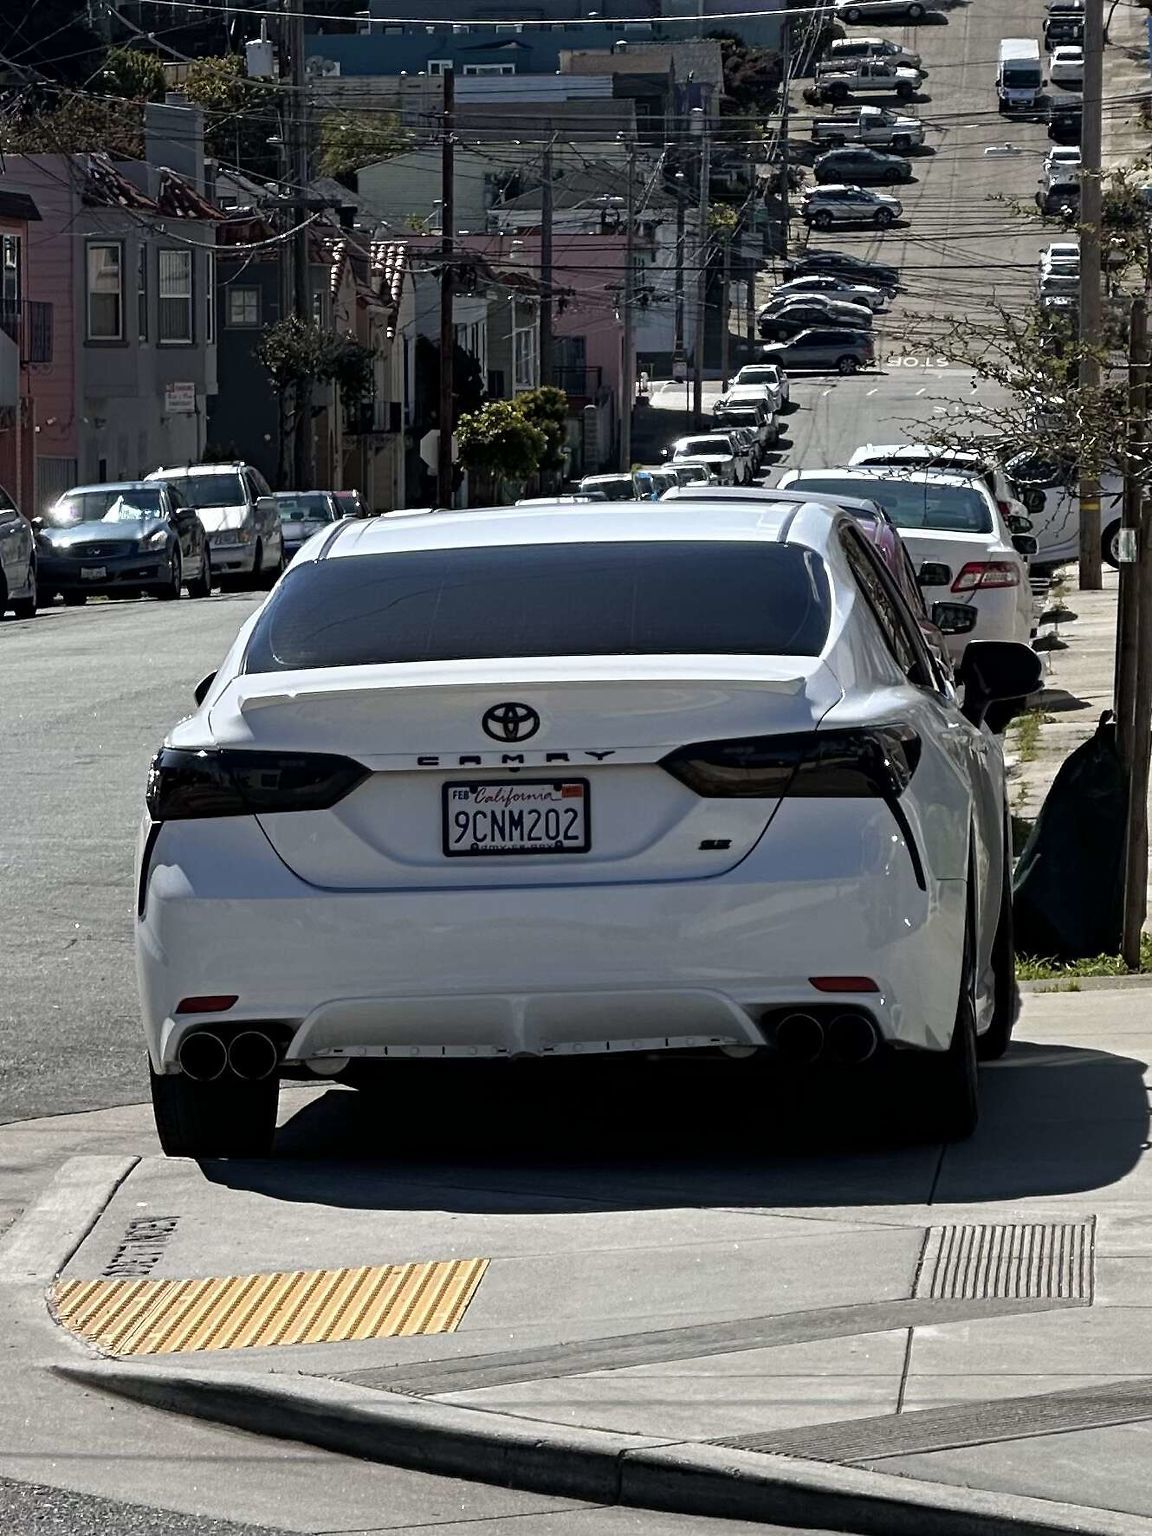 Photo of car in the street with license plate 9CNM202 in California